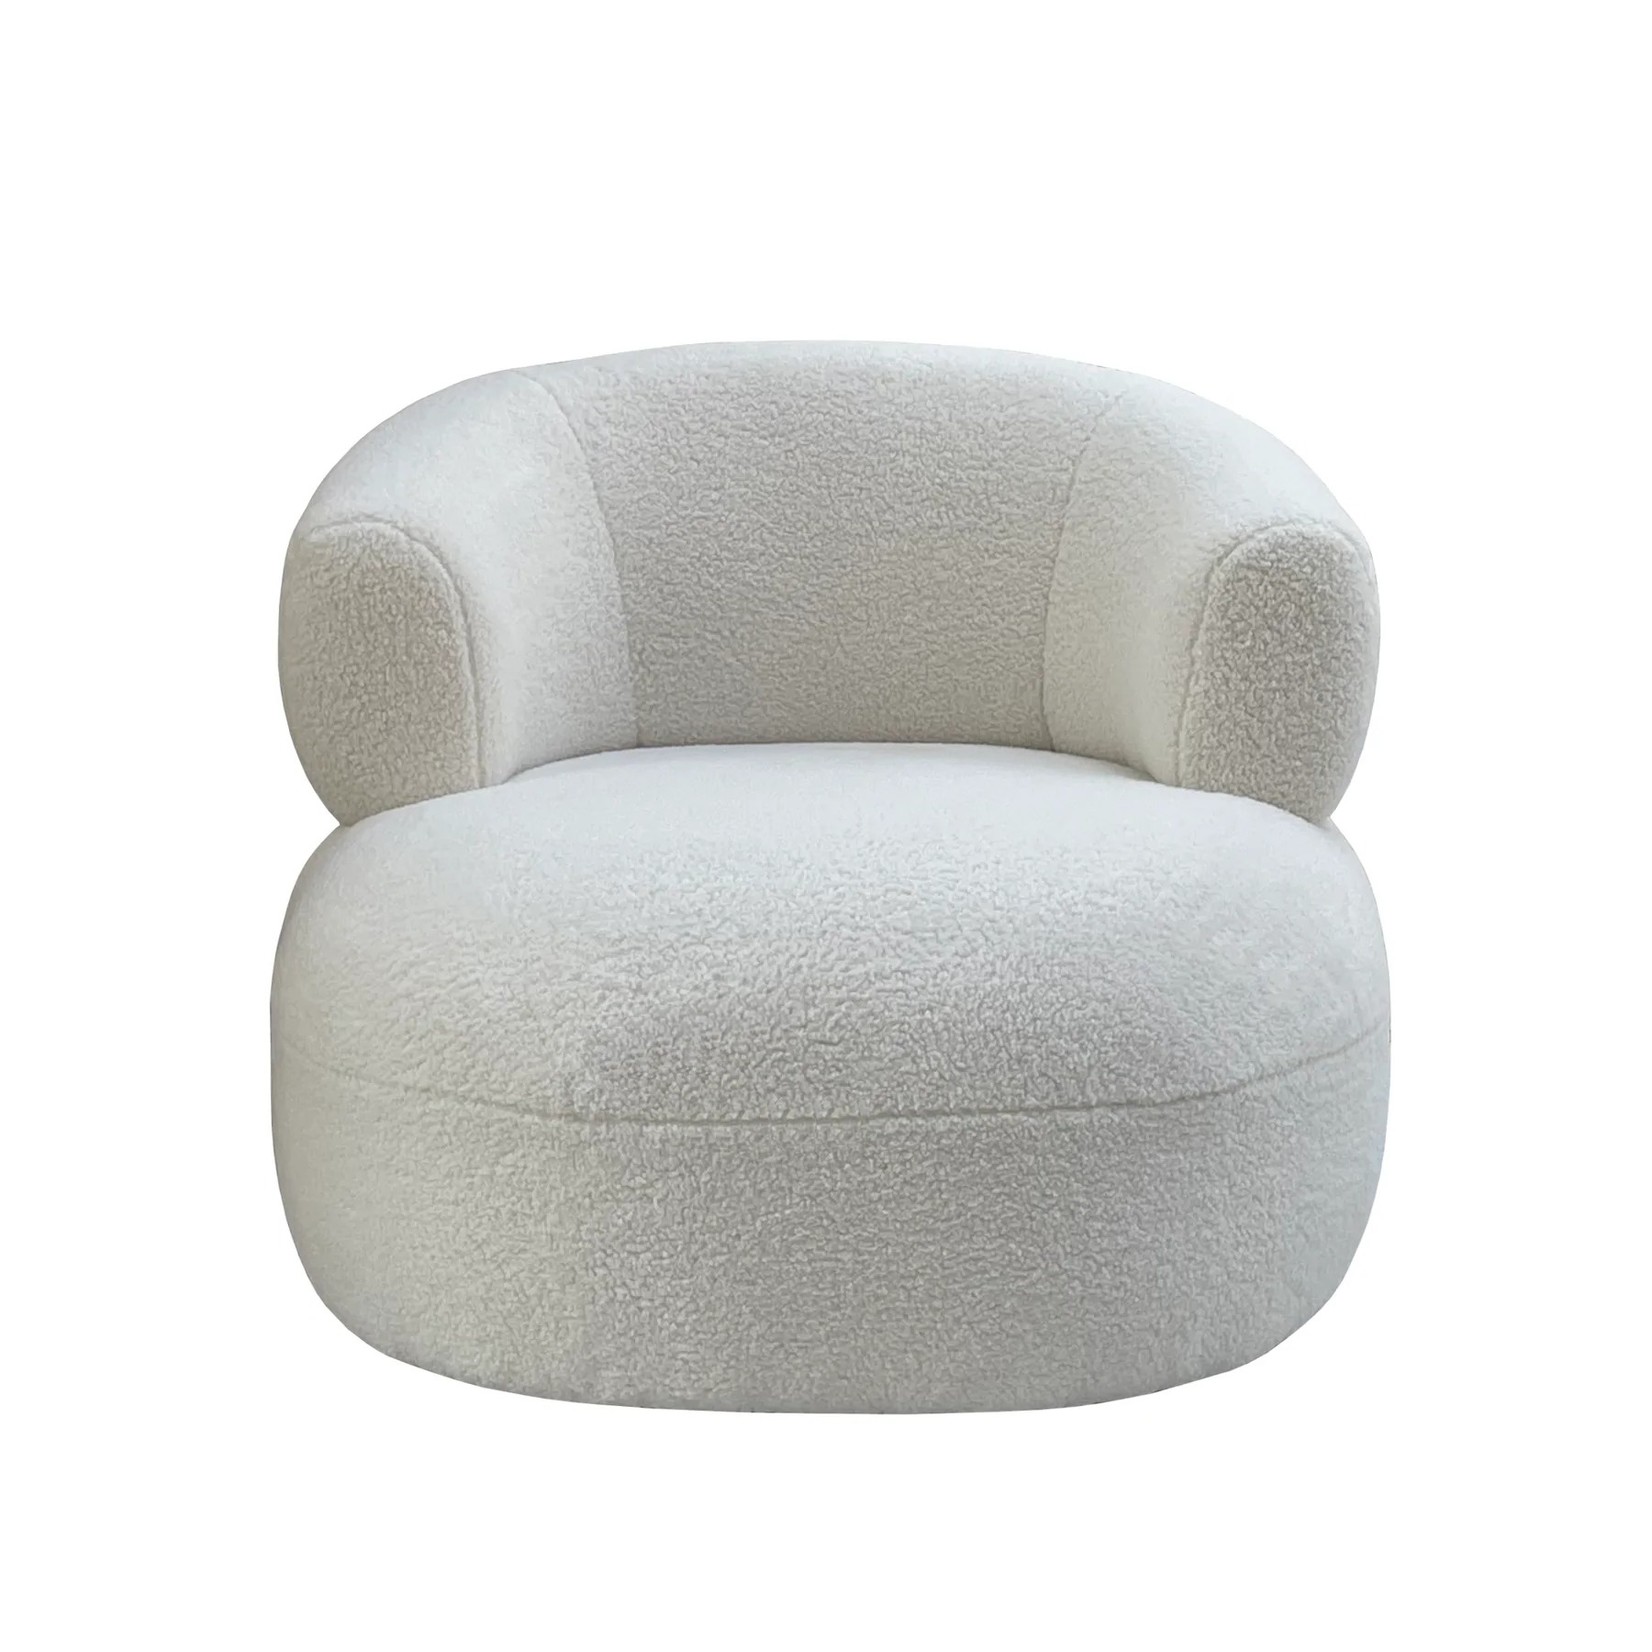 LH Imports Chill Club Chair